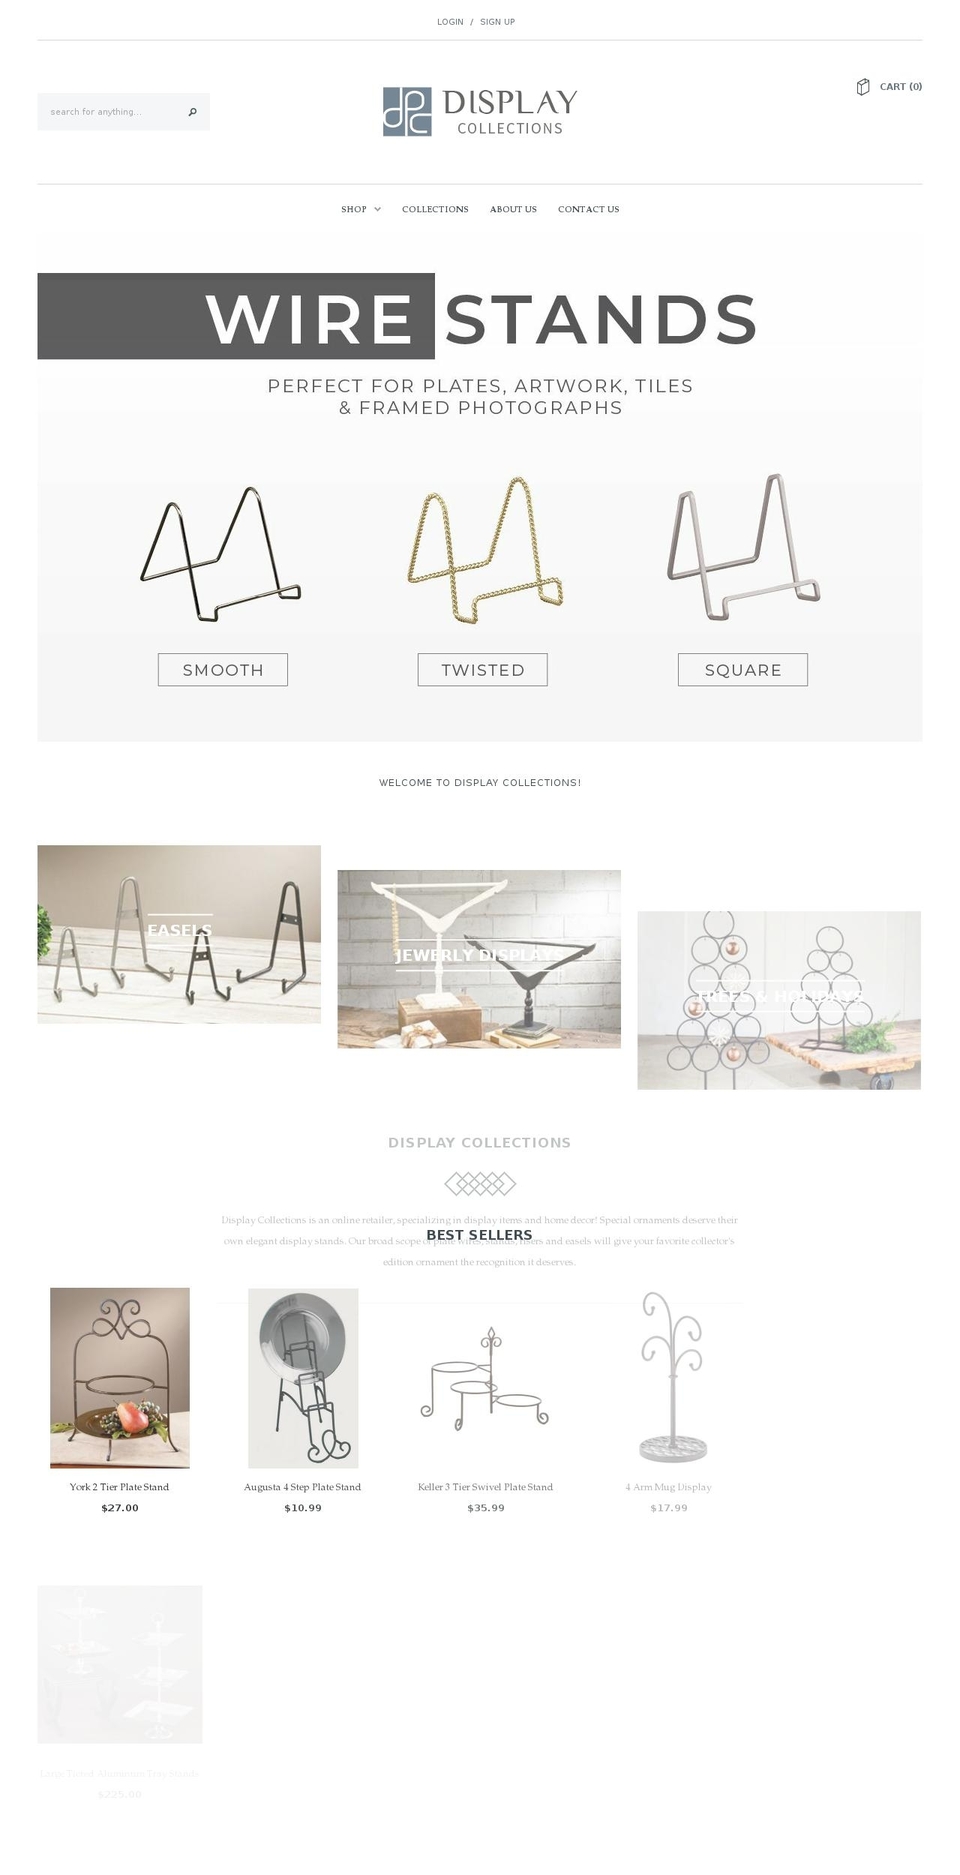 Avenue Shopify theme site example displaycollections.com